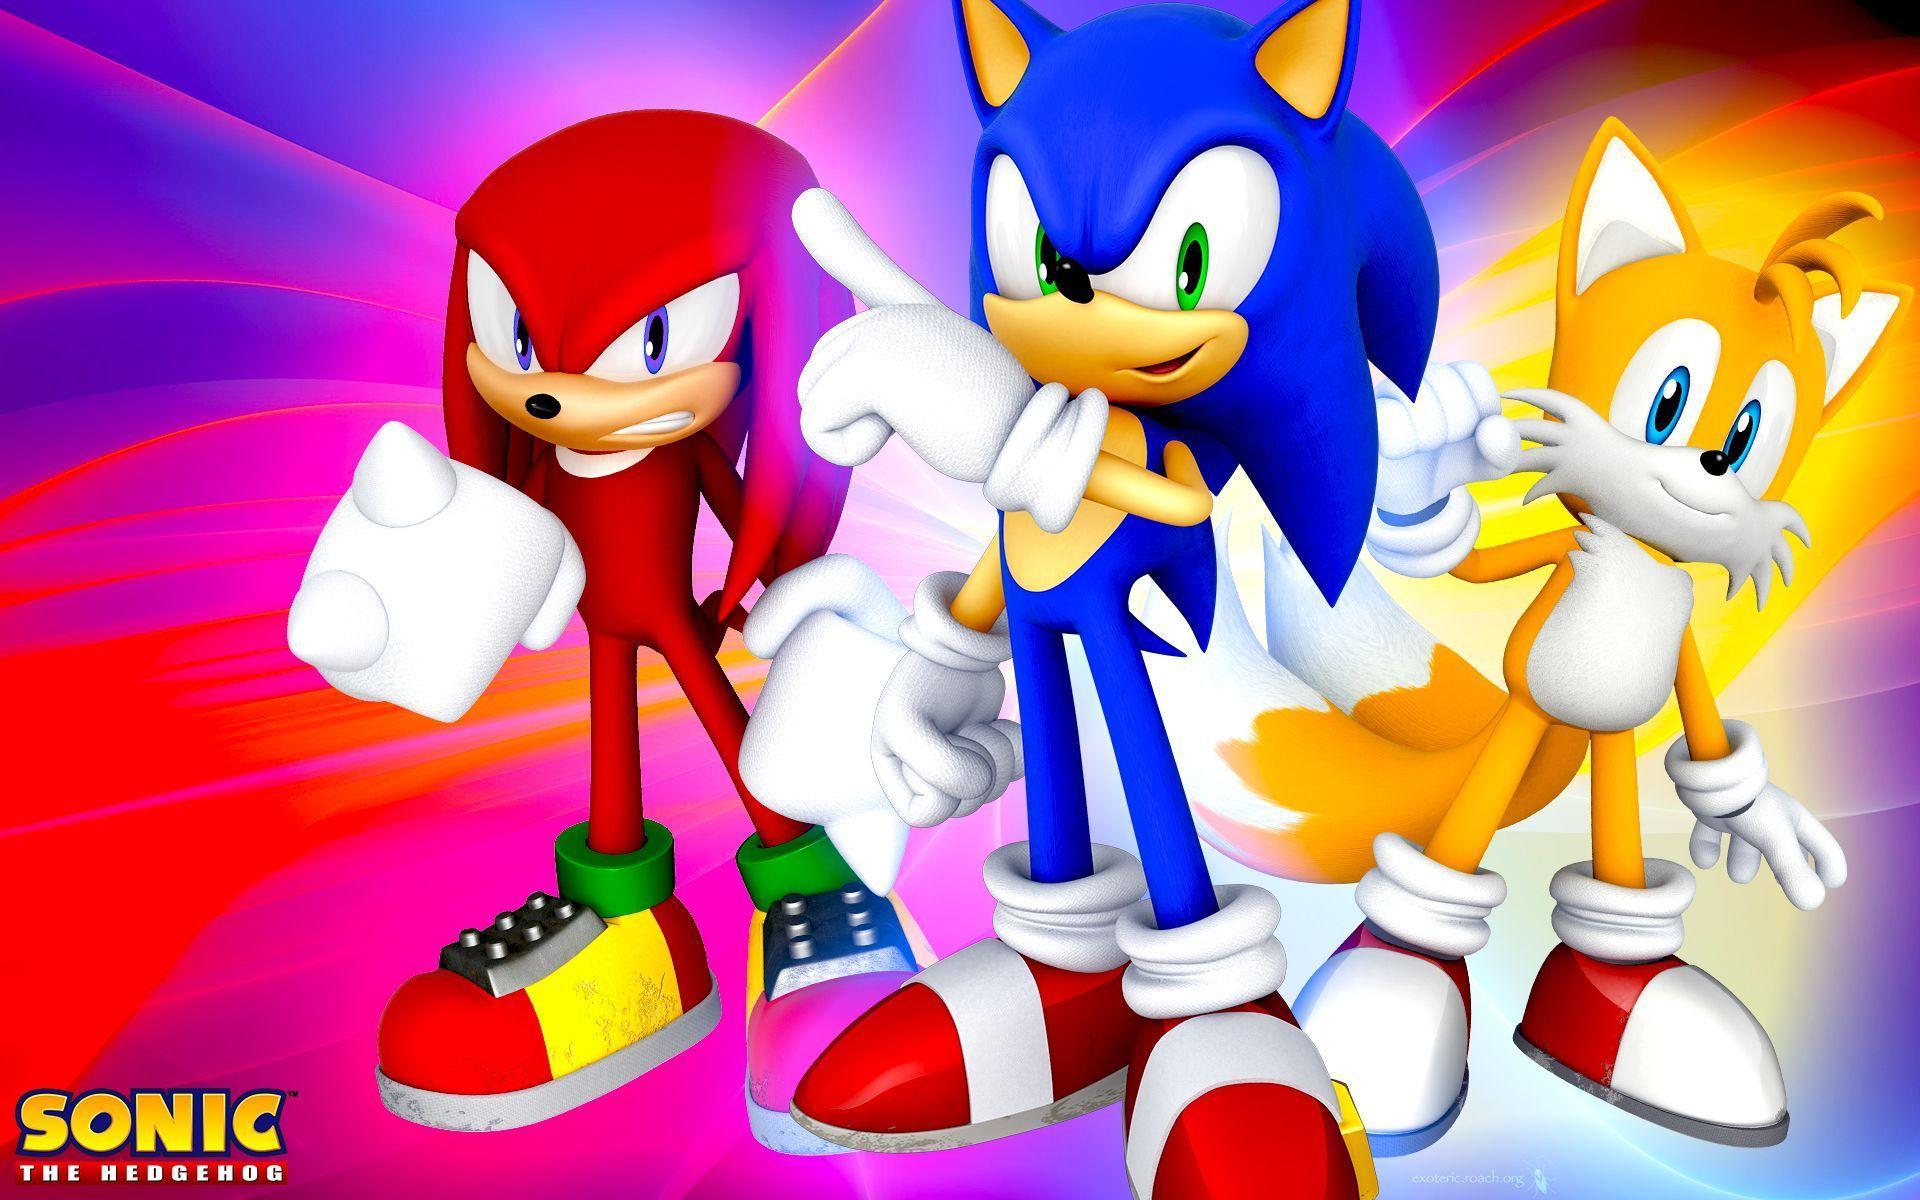 Classic Sonic The Hedgehog And Friends Wallpaper